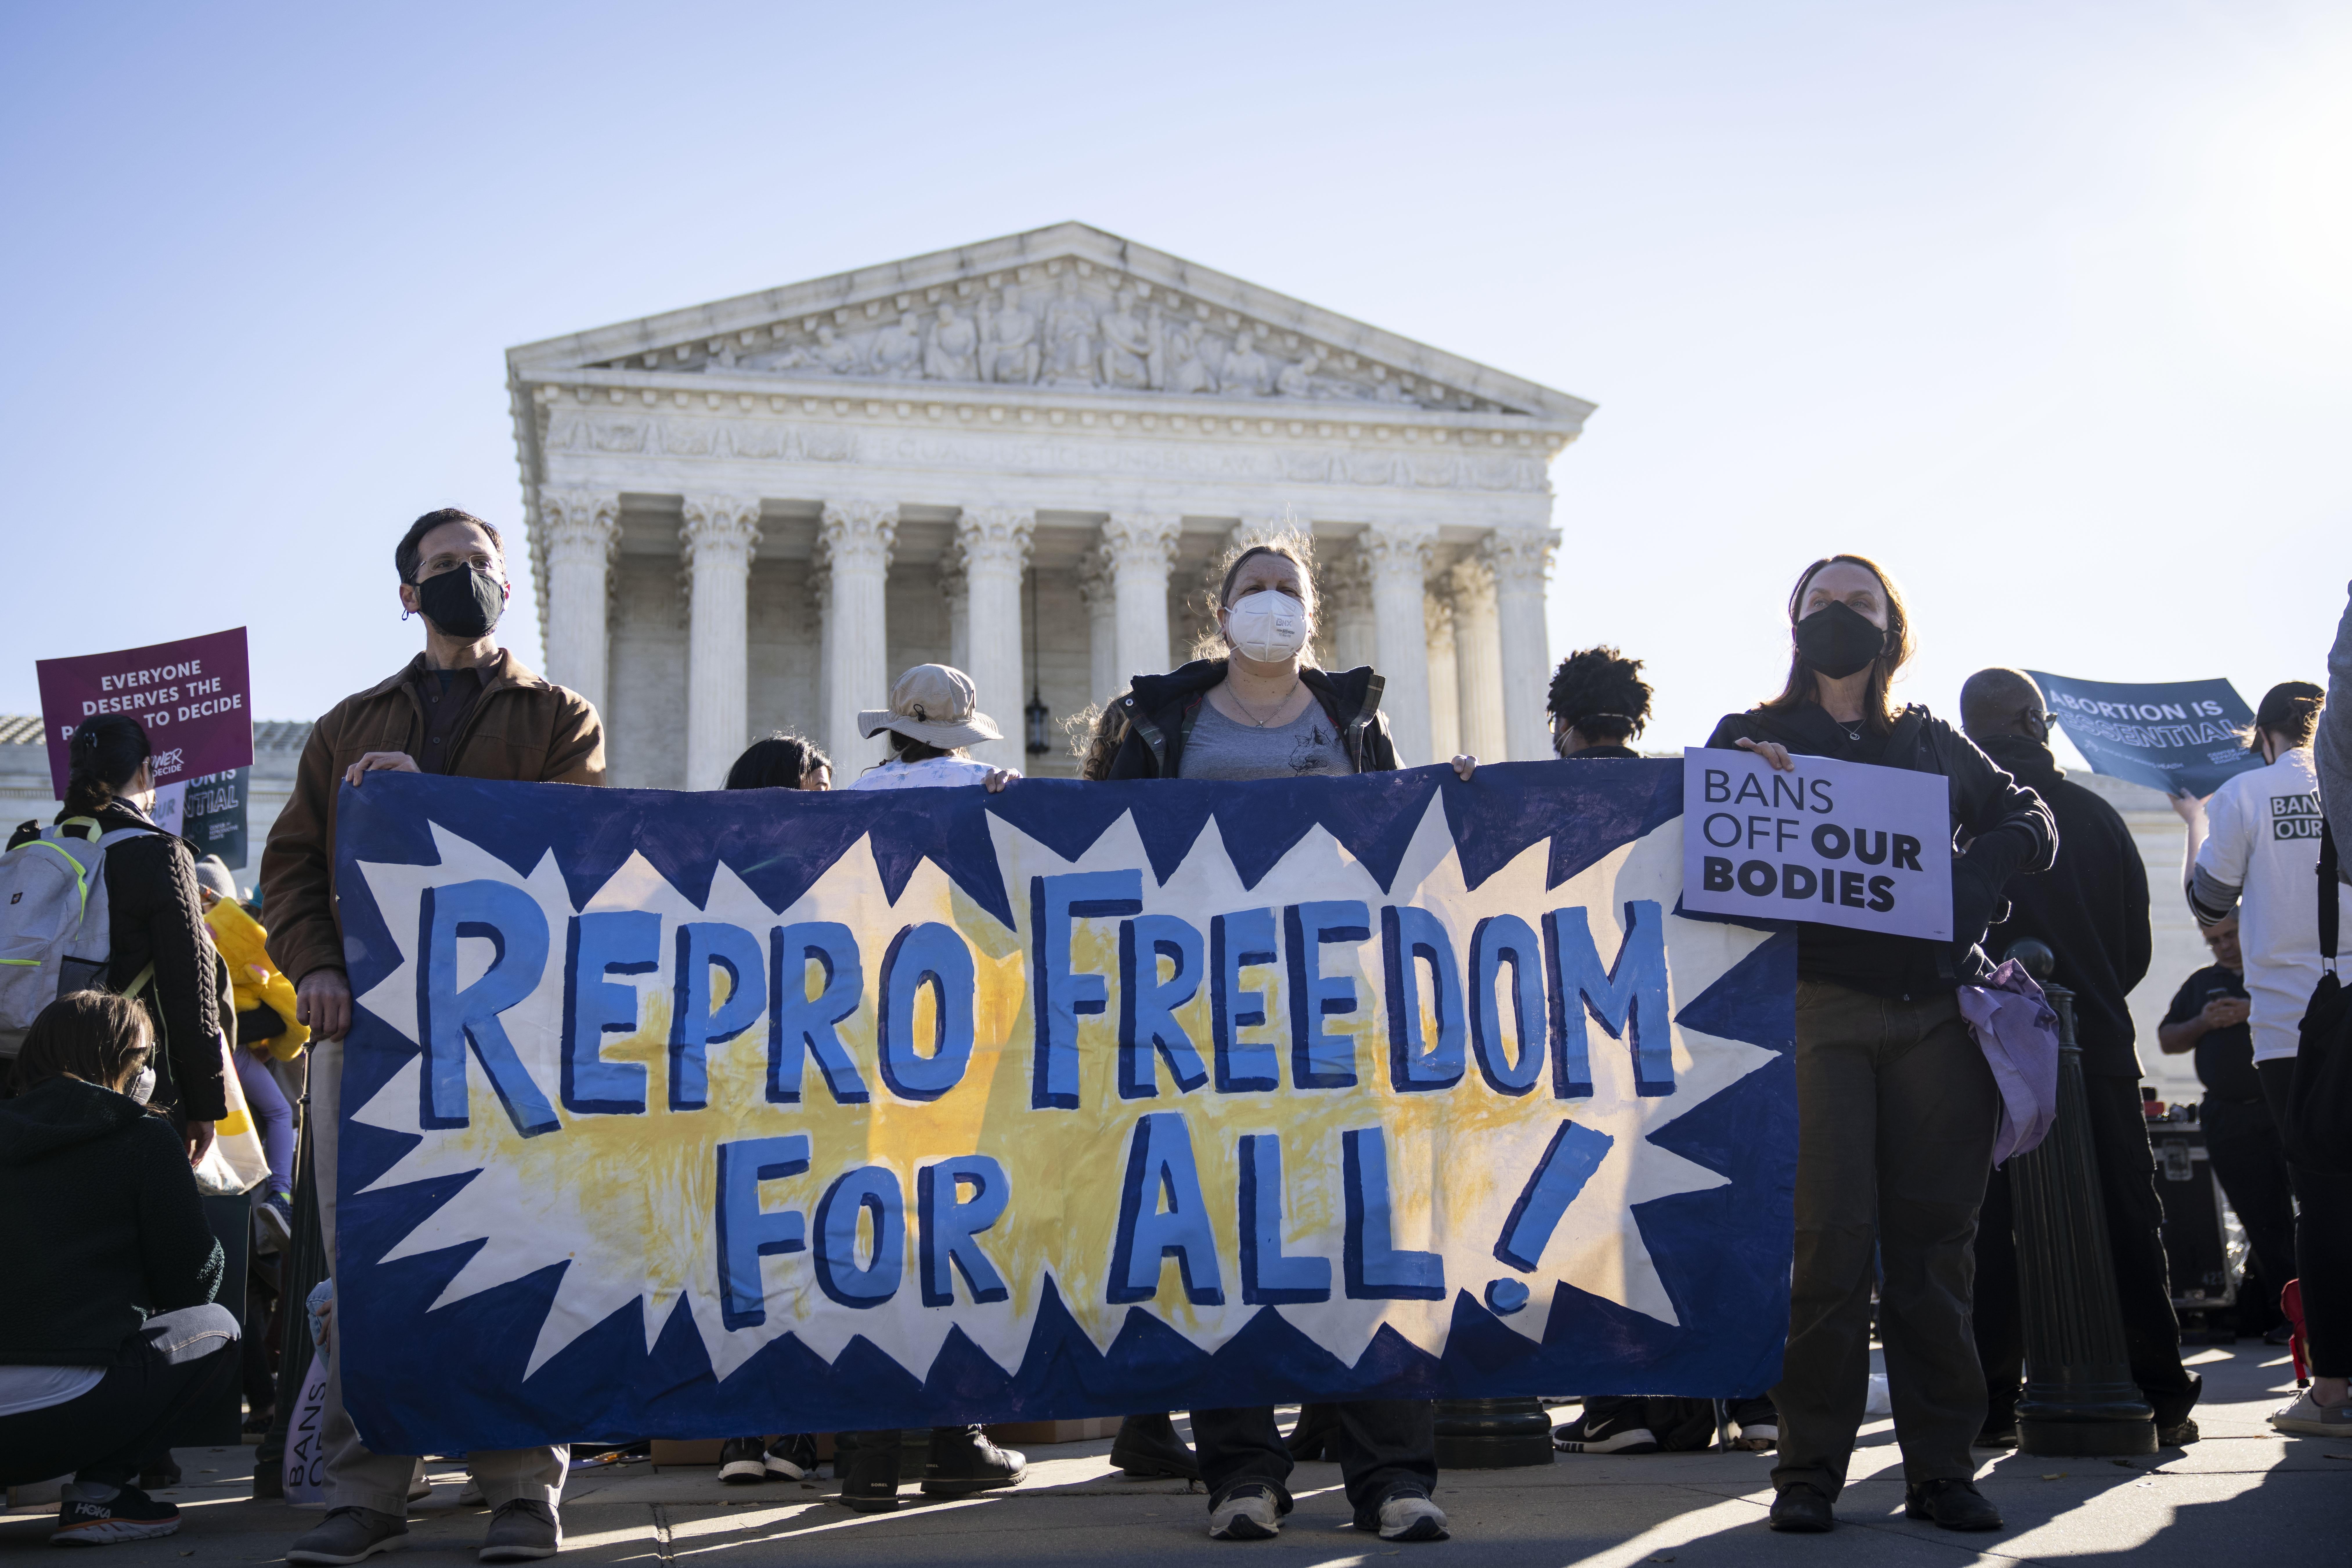 Protesters hold up a banner that says, "REPRO FREEDOM FOR ALL" on the steps of the Supreme Court building.